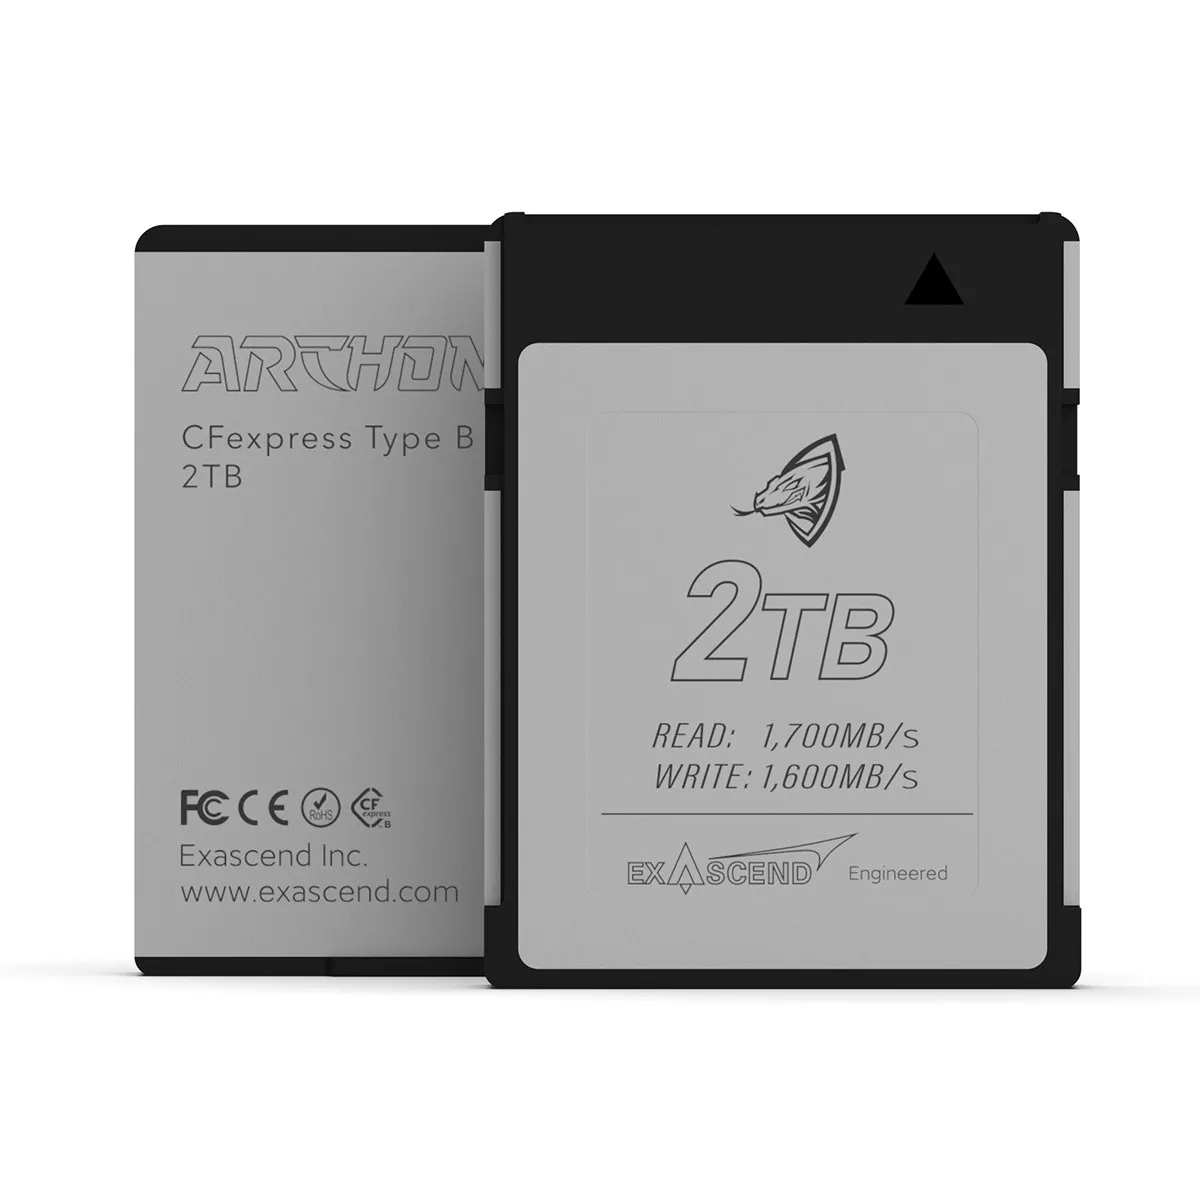 Image showing the front and back of the Exascend Archon CFexpress for RED 2 TB